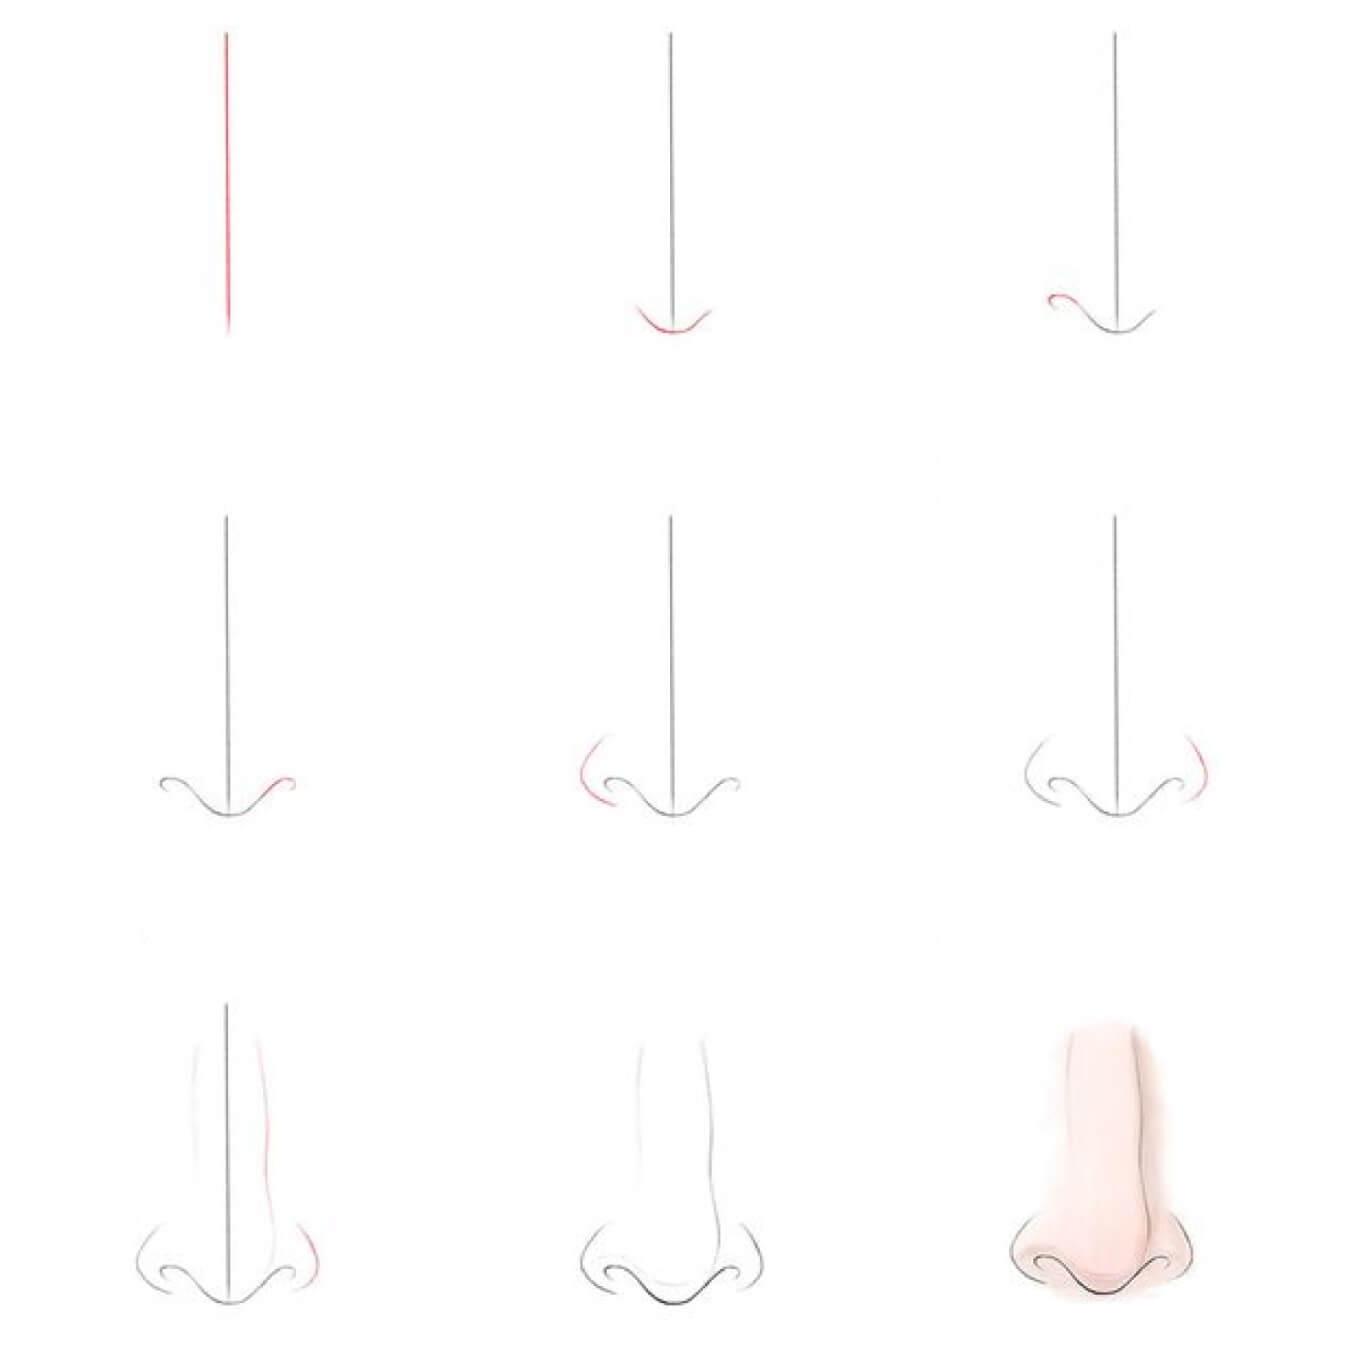 Nose Drawing Ideas